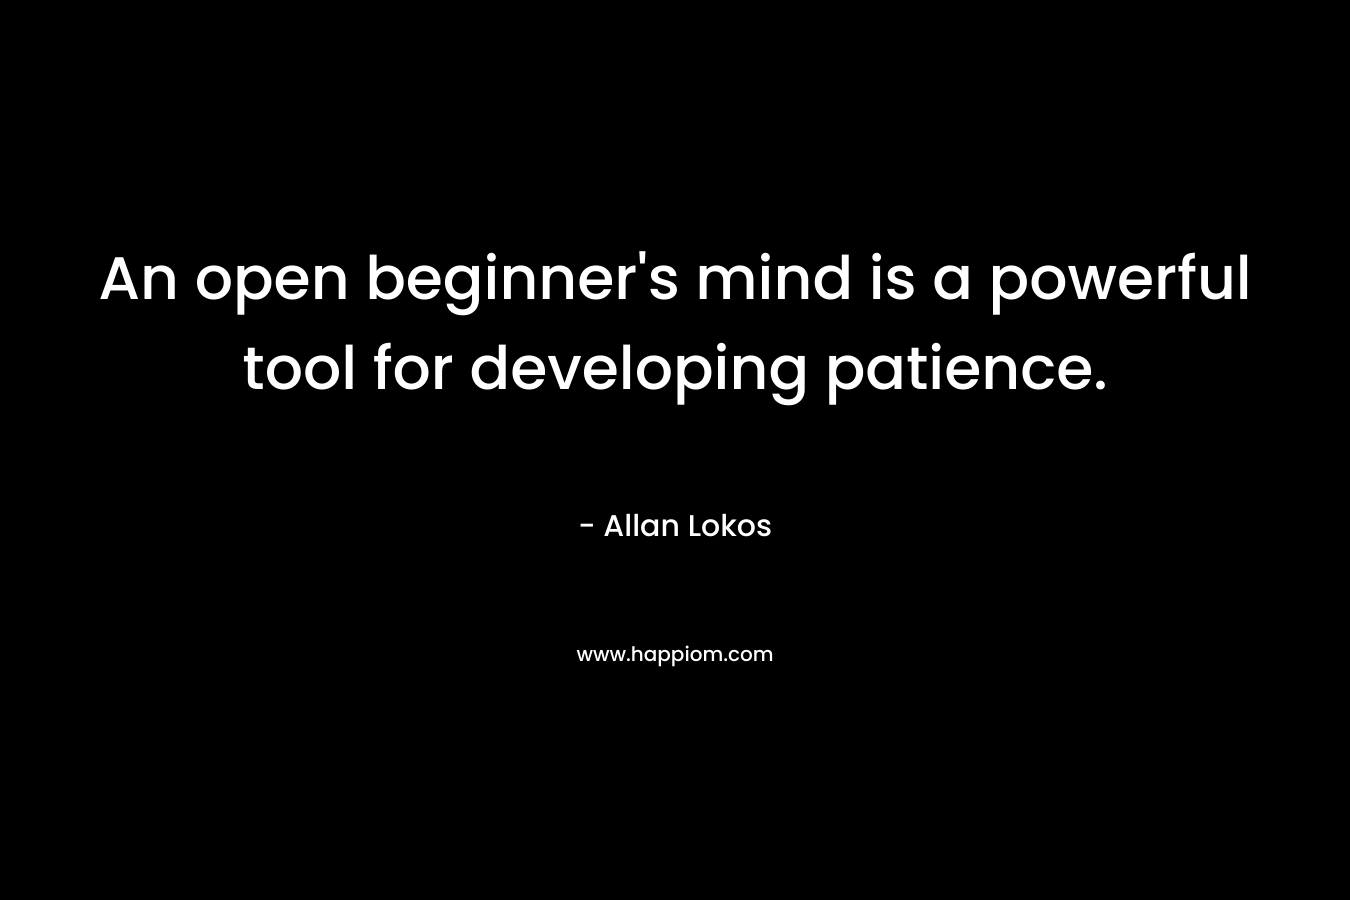 An open beginner's mind is a powerful tool for developing patience.